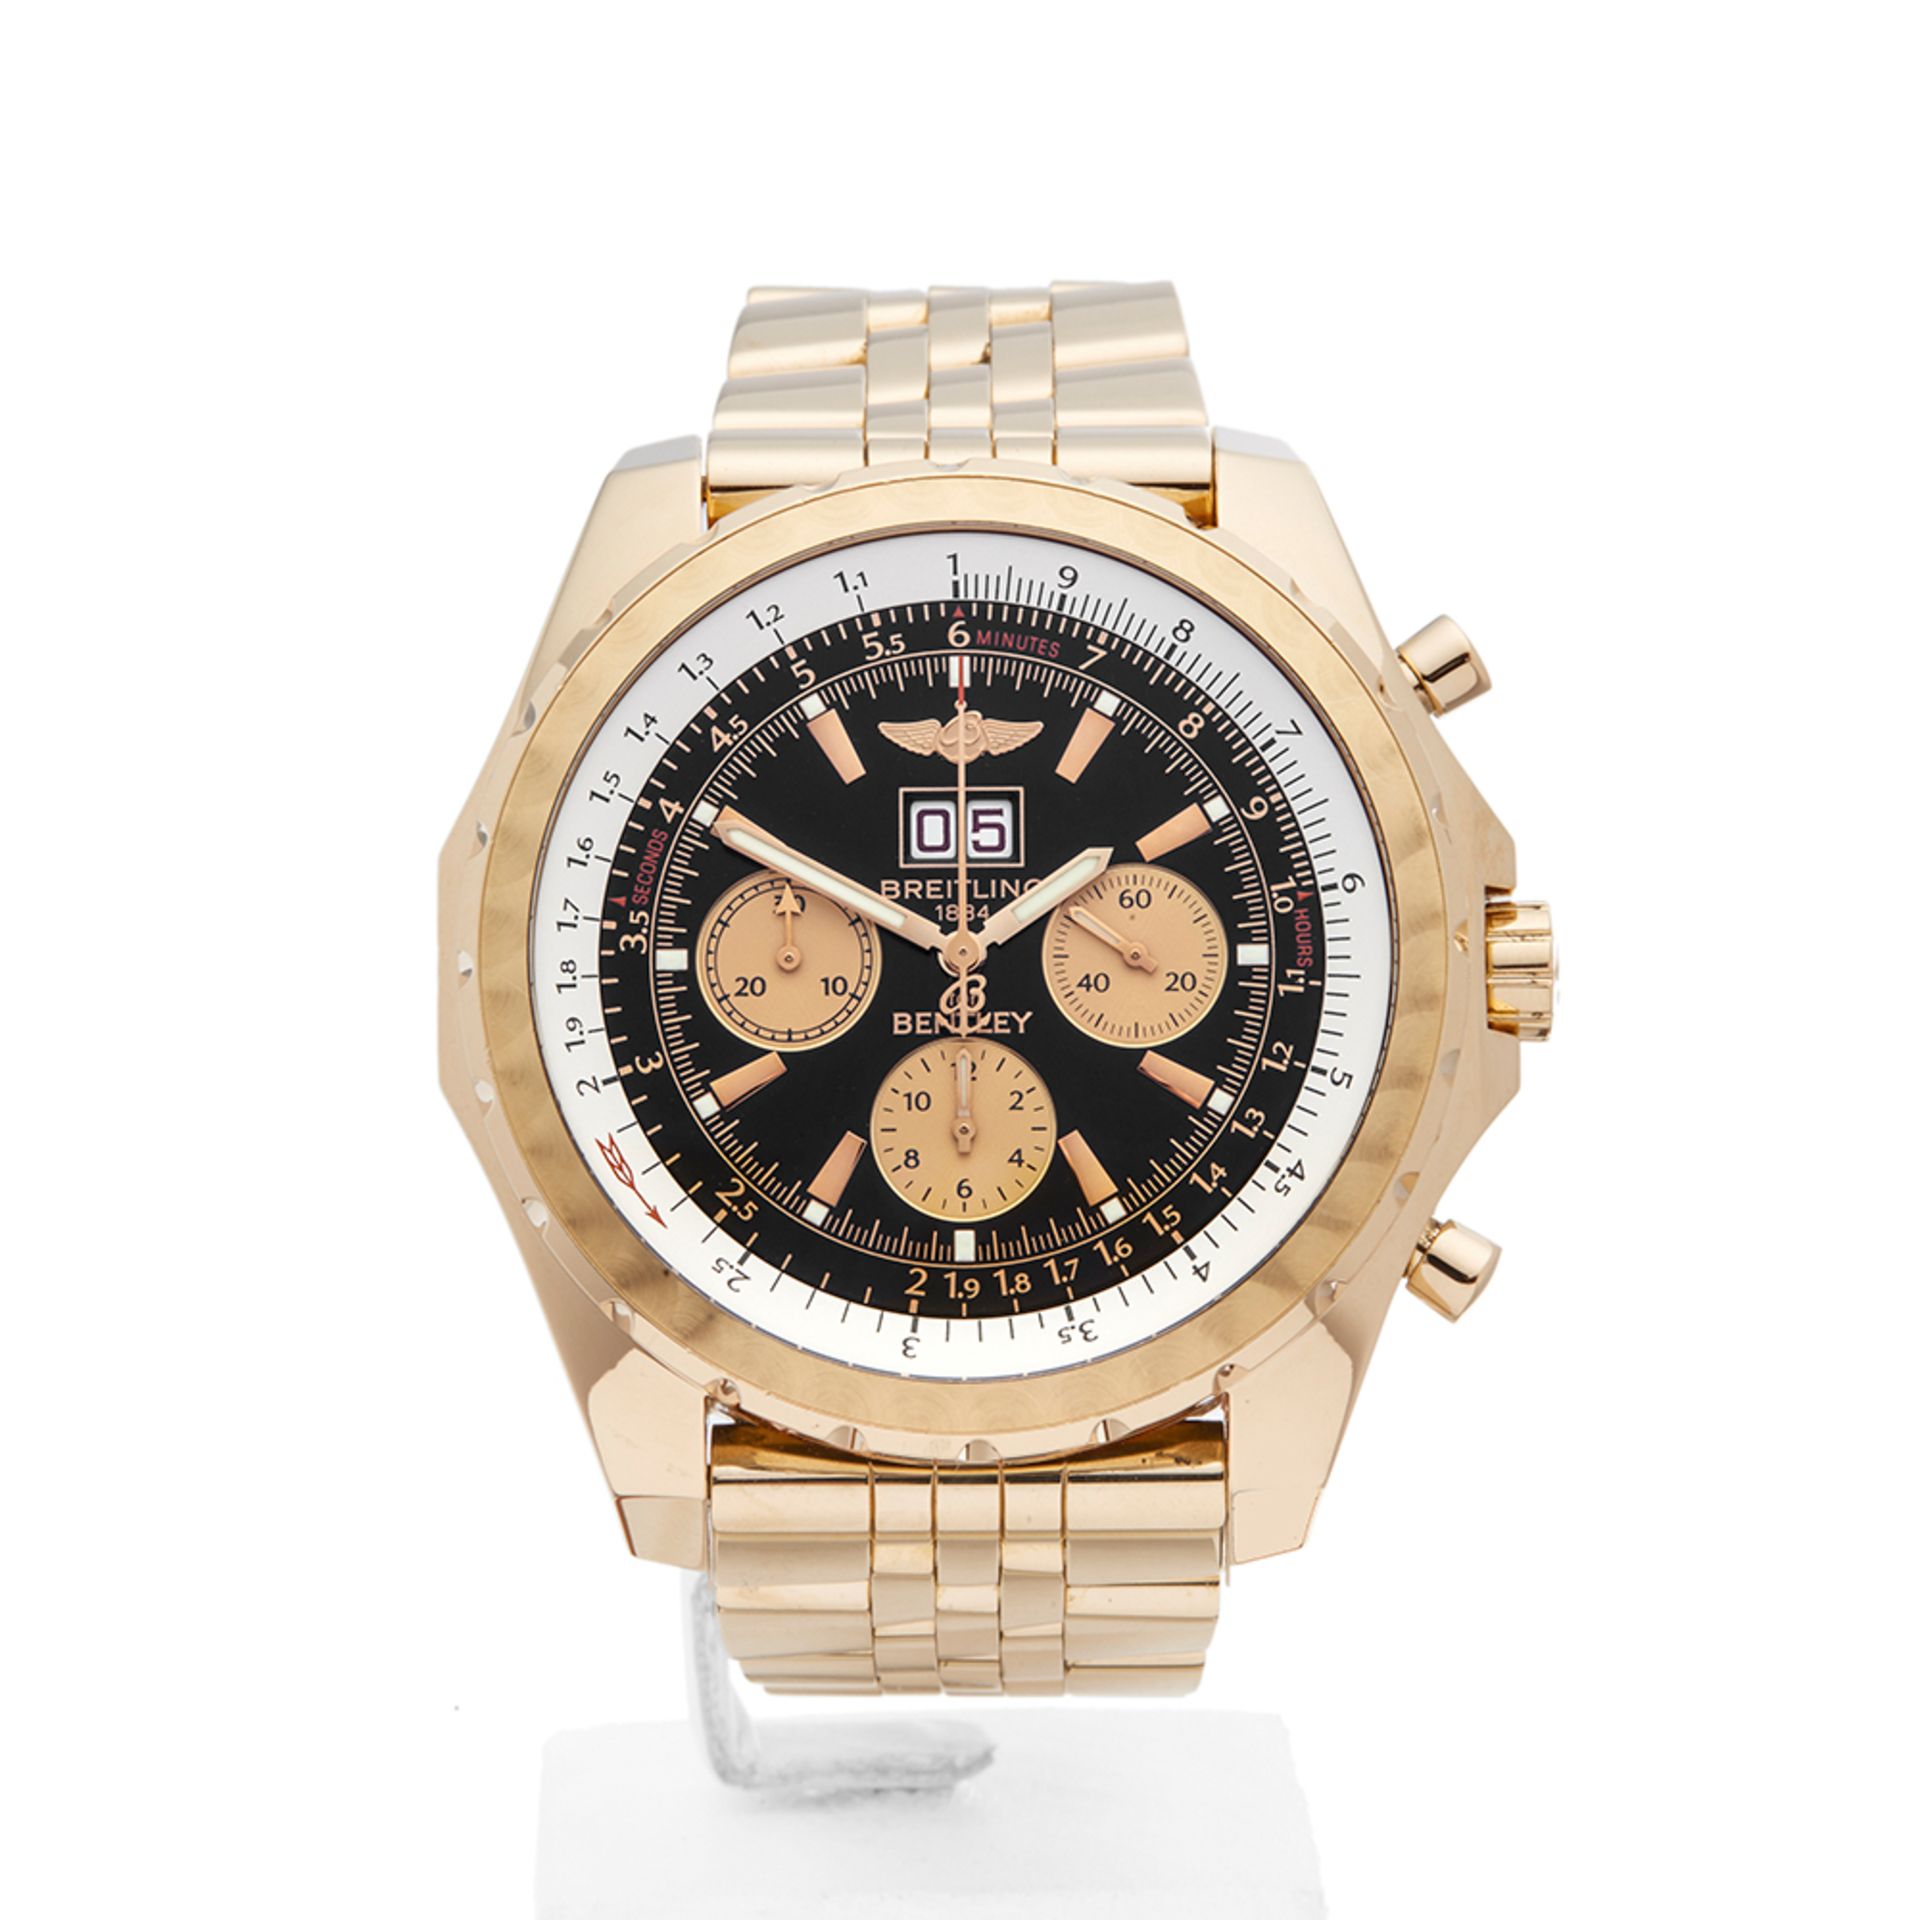 Breitling Bentley Chronograph 48mm 18k Yellow Gold - H44363 - Image 2 of 9